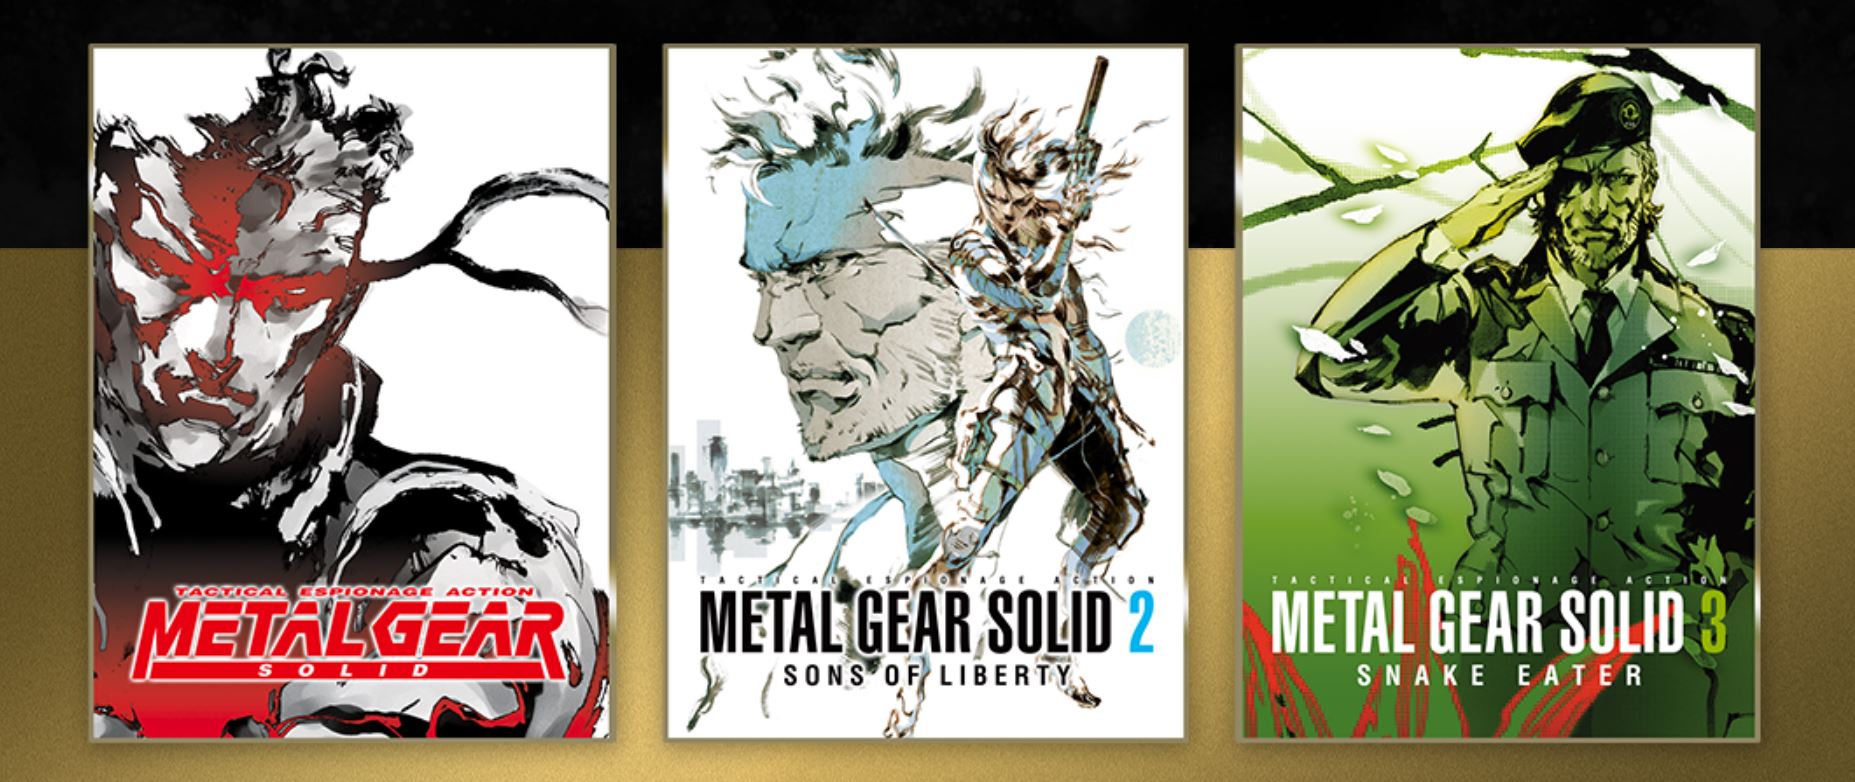 Metal Gear Solid: Master Collection Vol. 1 Review - Kept You